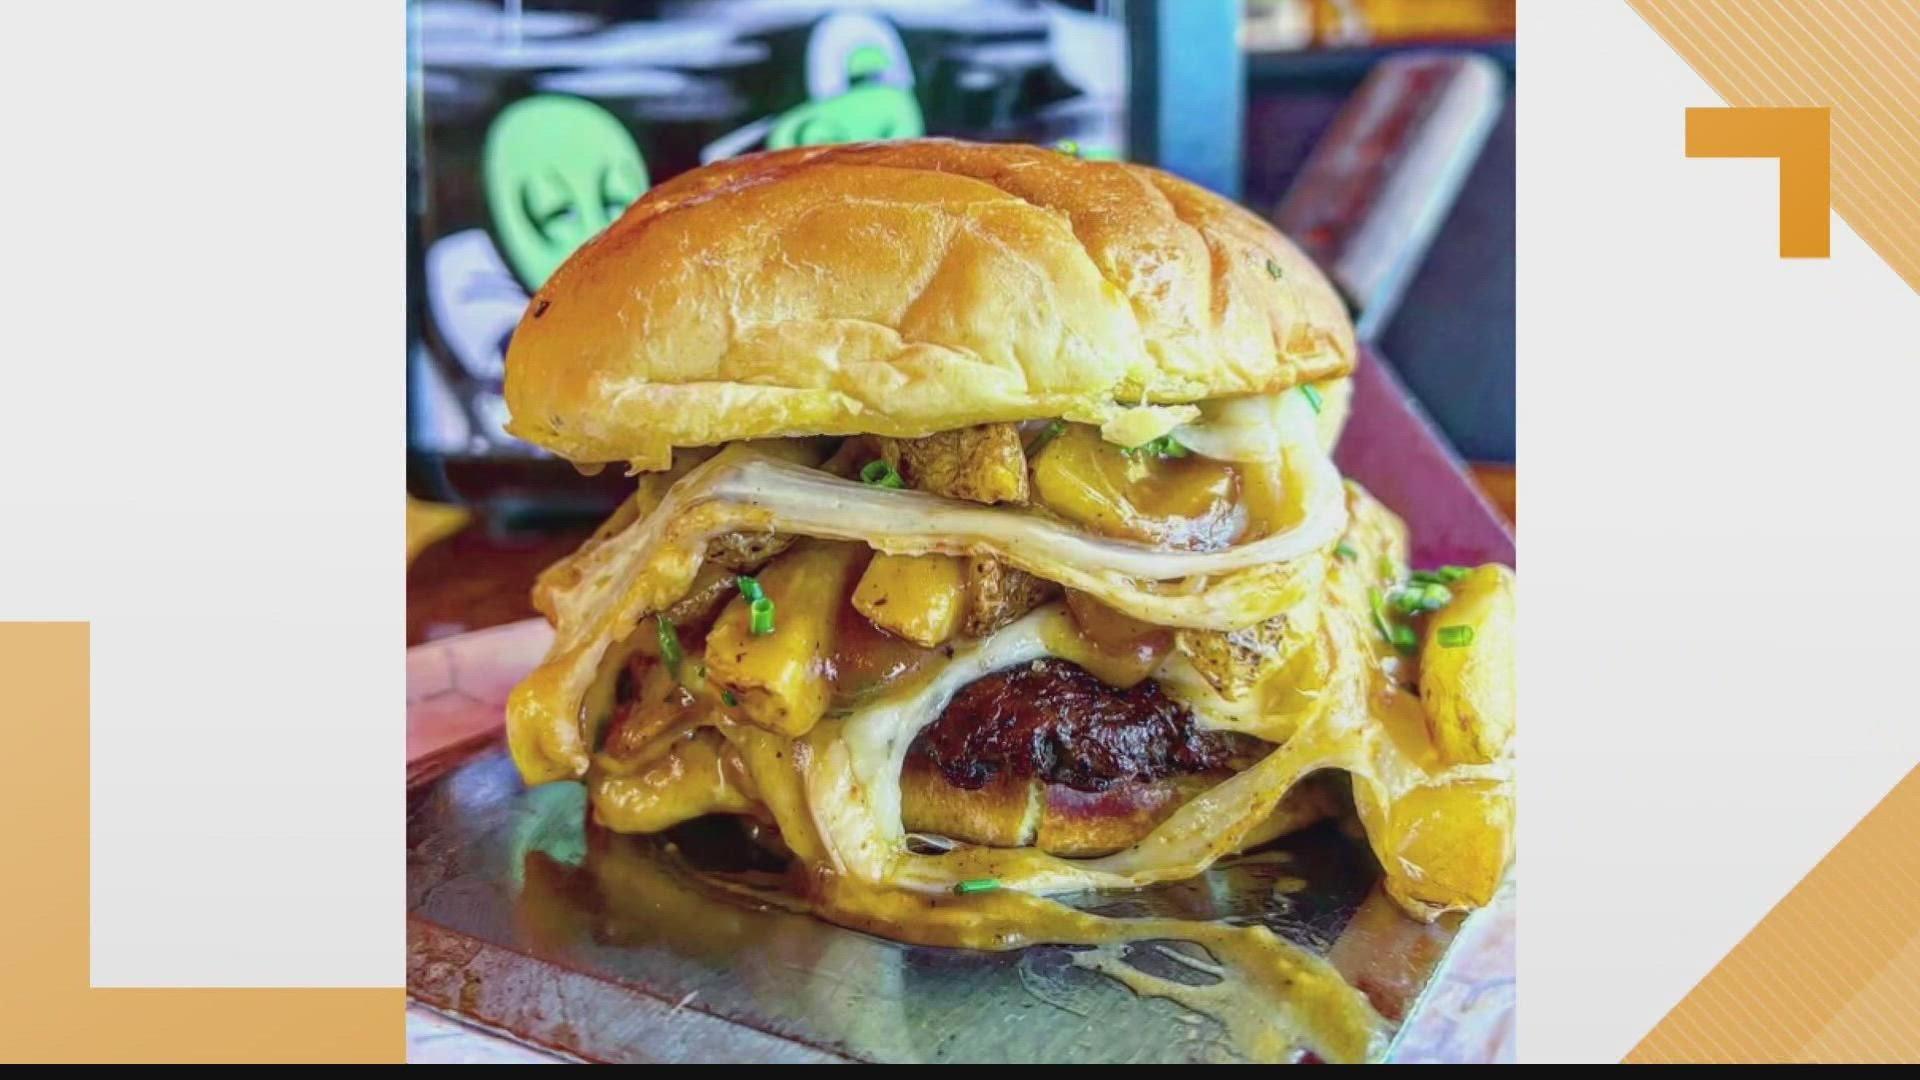 St. Louis Burger Week kicks off on Monday. More than 60 local restaurants are offering $8 deals on their unique take on the burger.